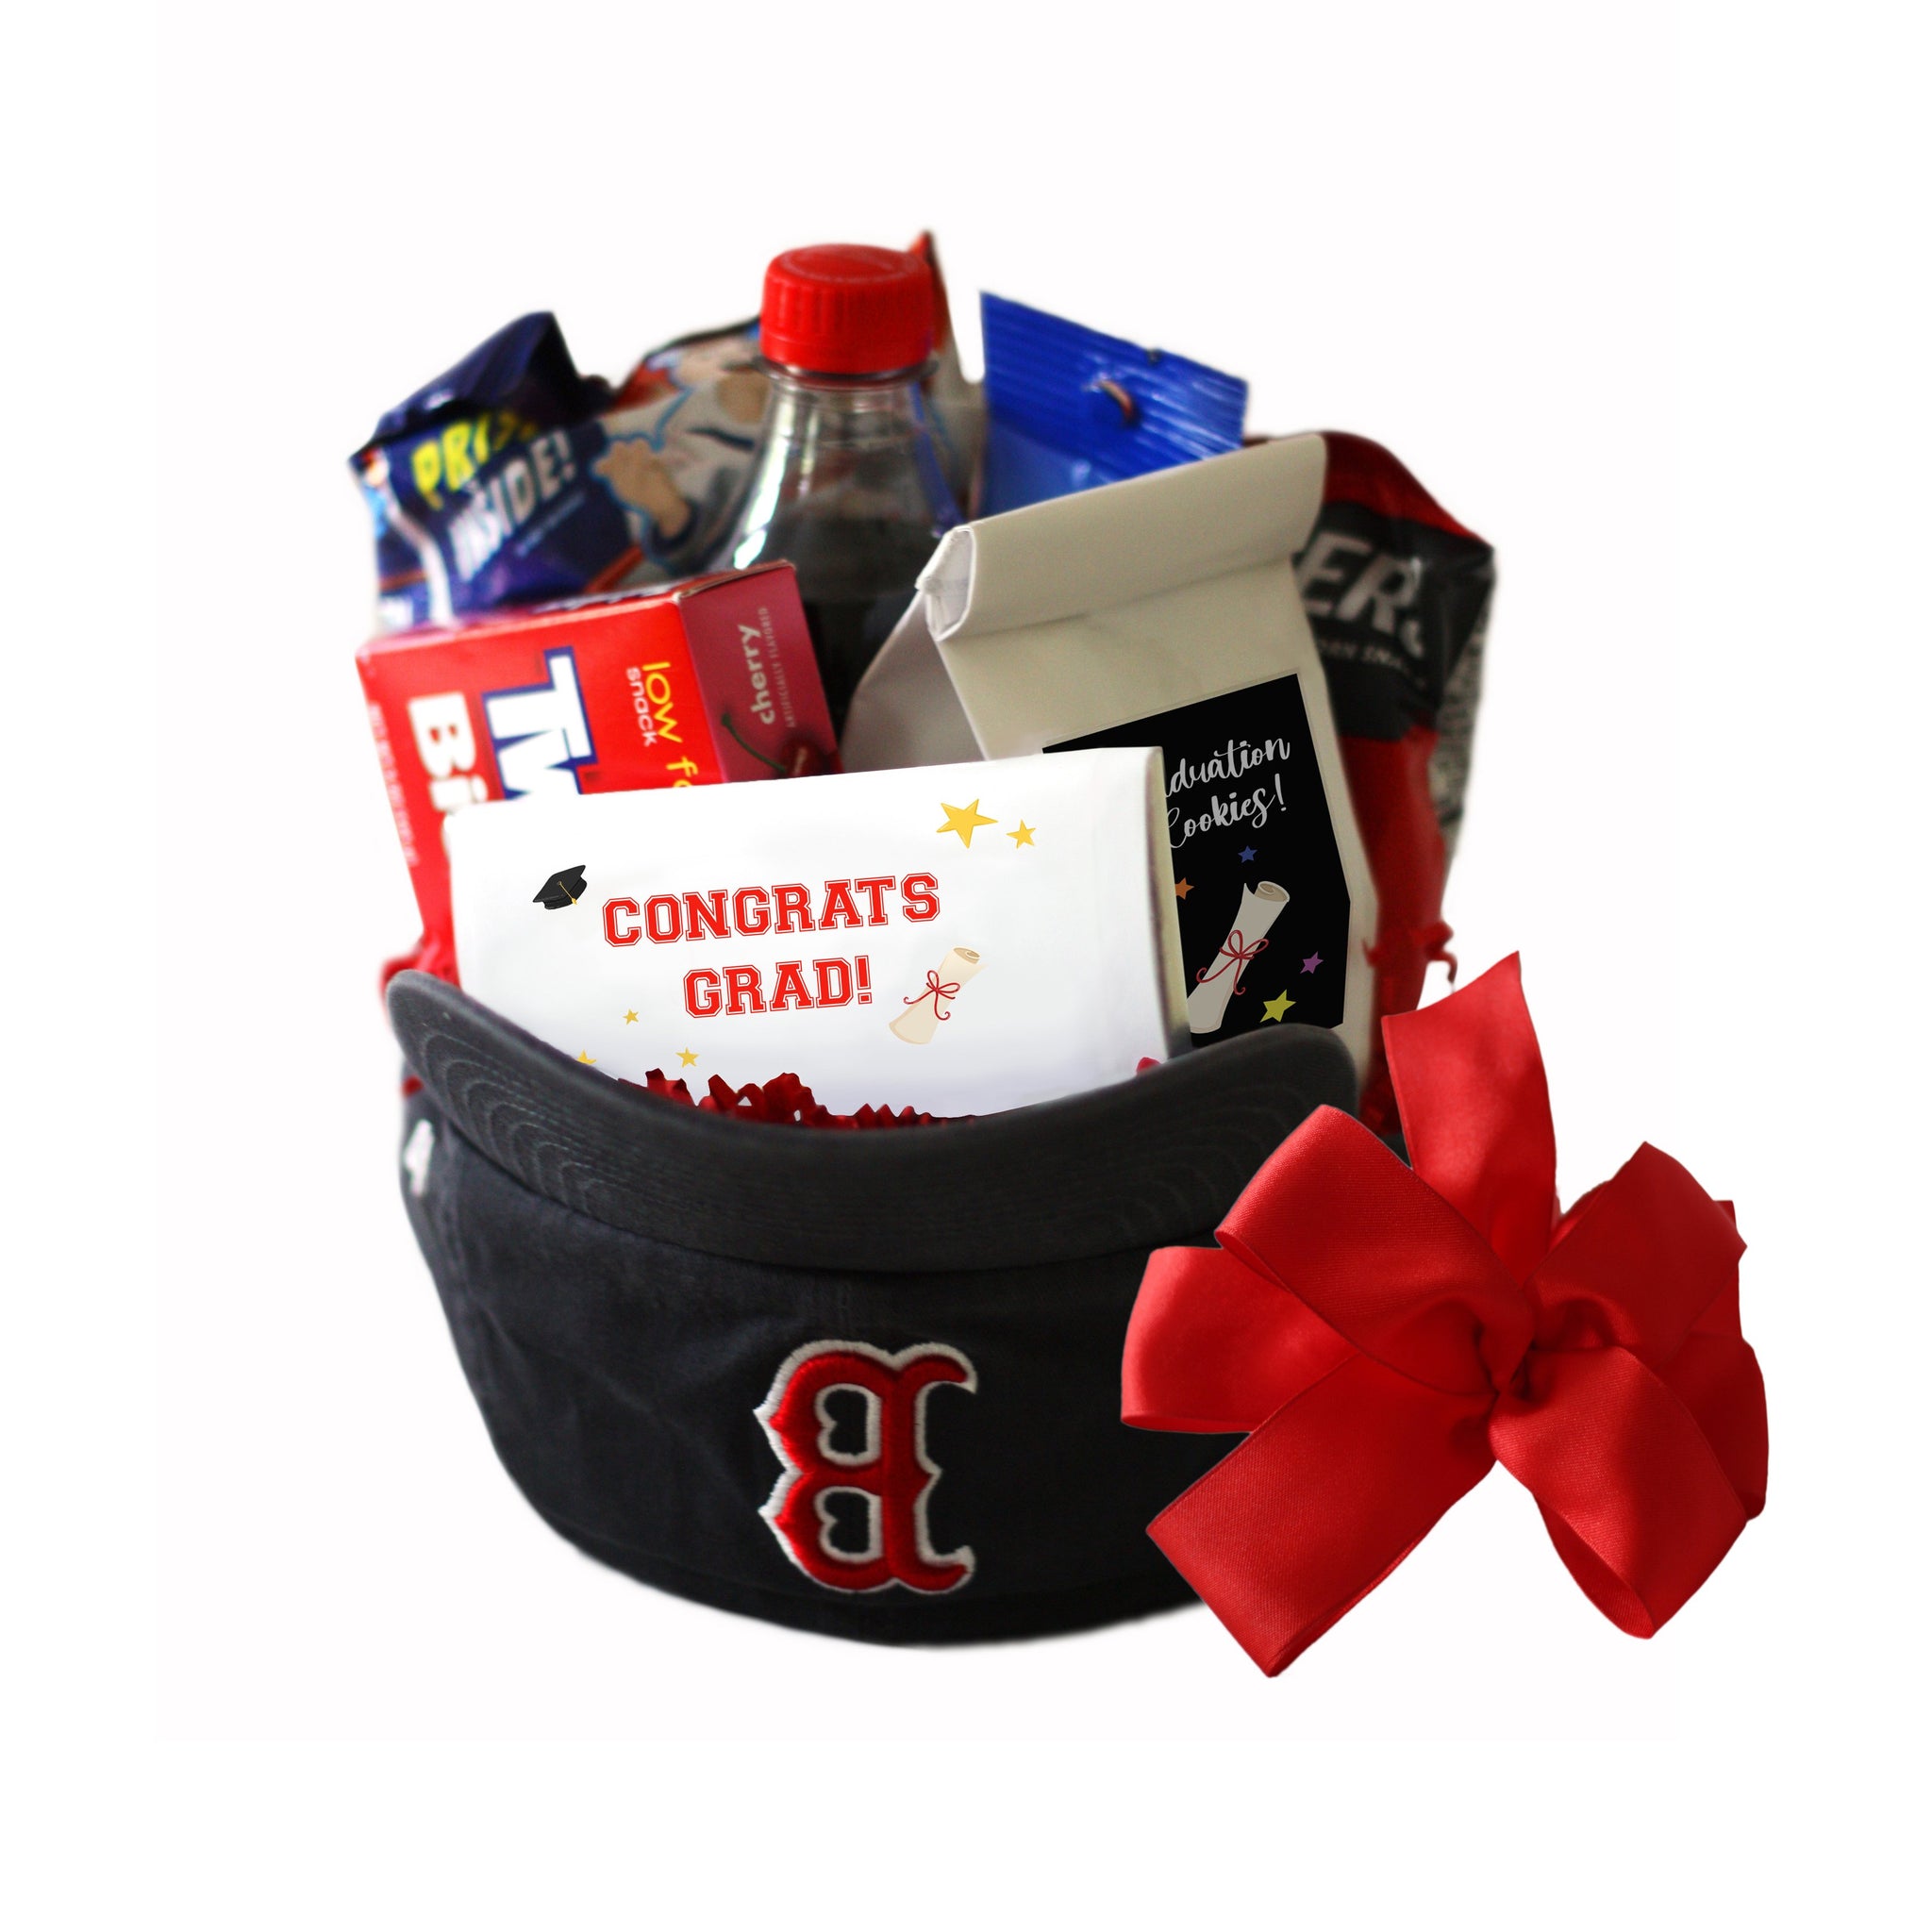 Hats-Off To You Graduation Gift Basket